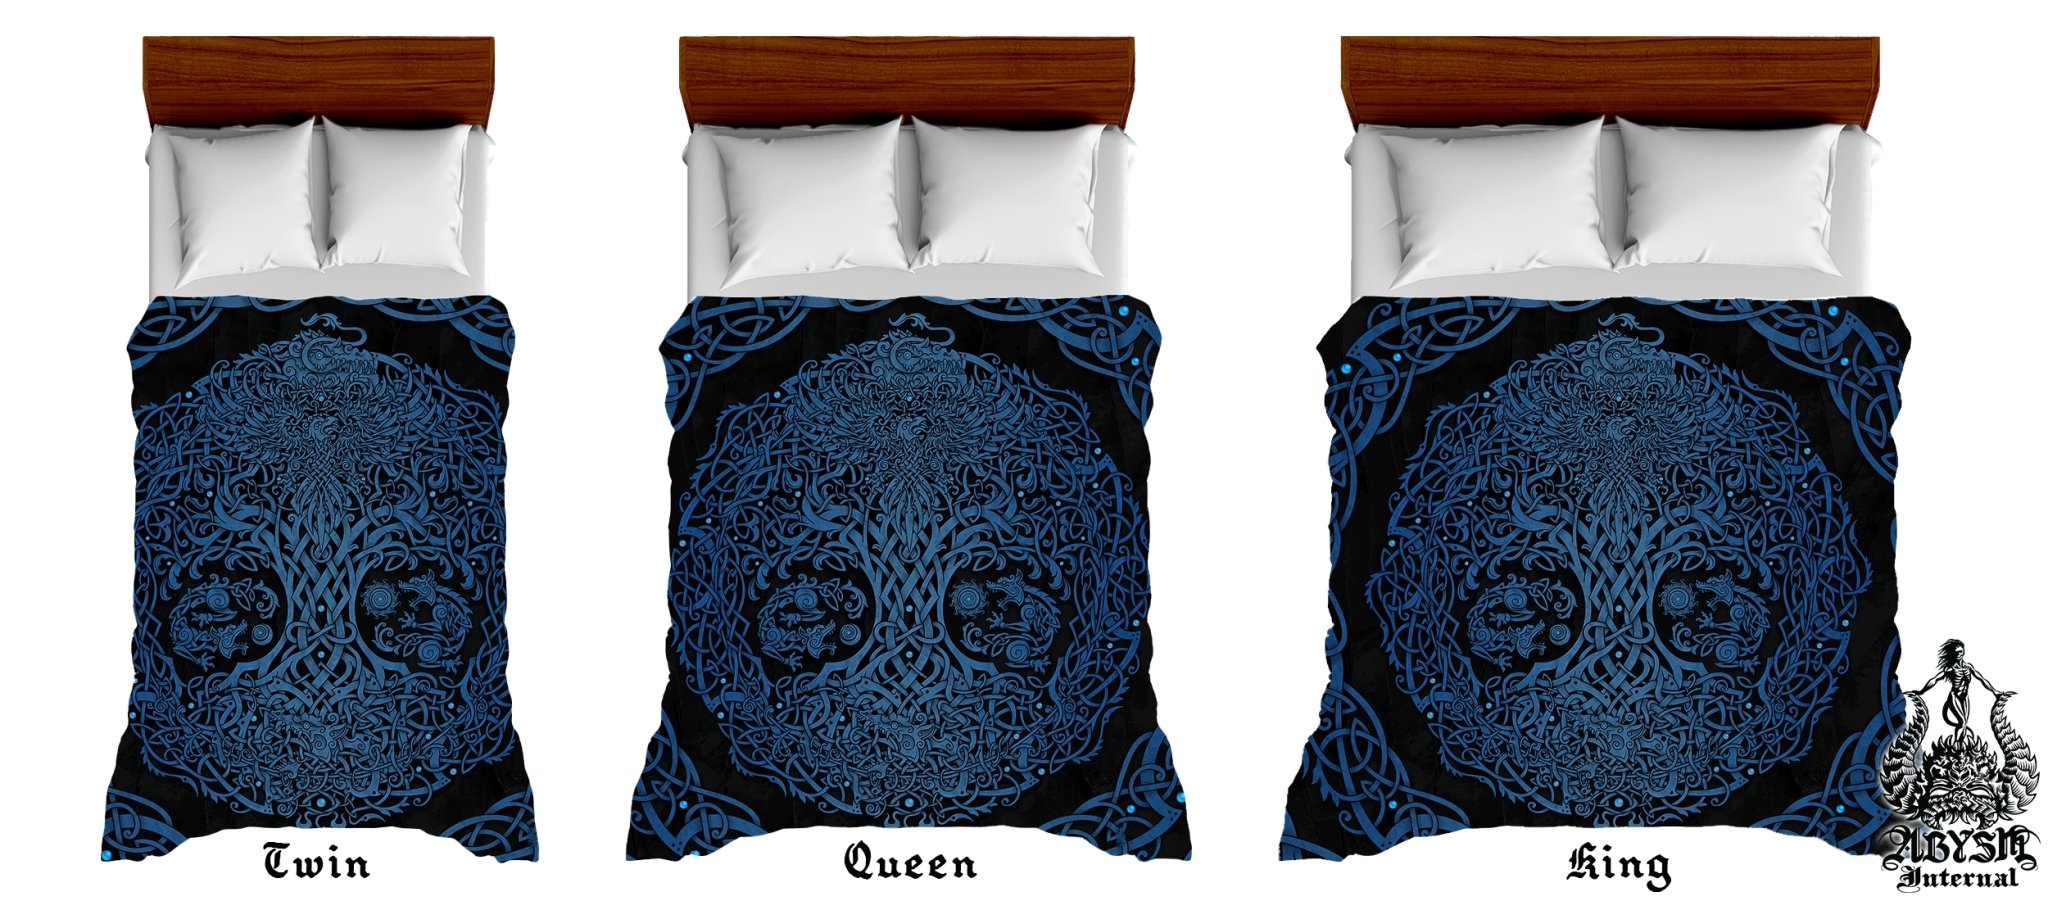 Viking Bedding Set, Comforter and Duvet, Yggdrasil Bed Cover and Bedroom Decor, Norse Art, King, Queen and Twin Size - Black and Blue - Abysm Internal